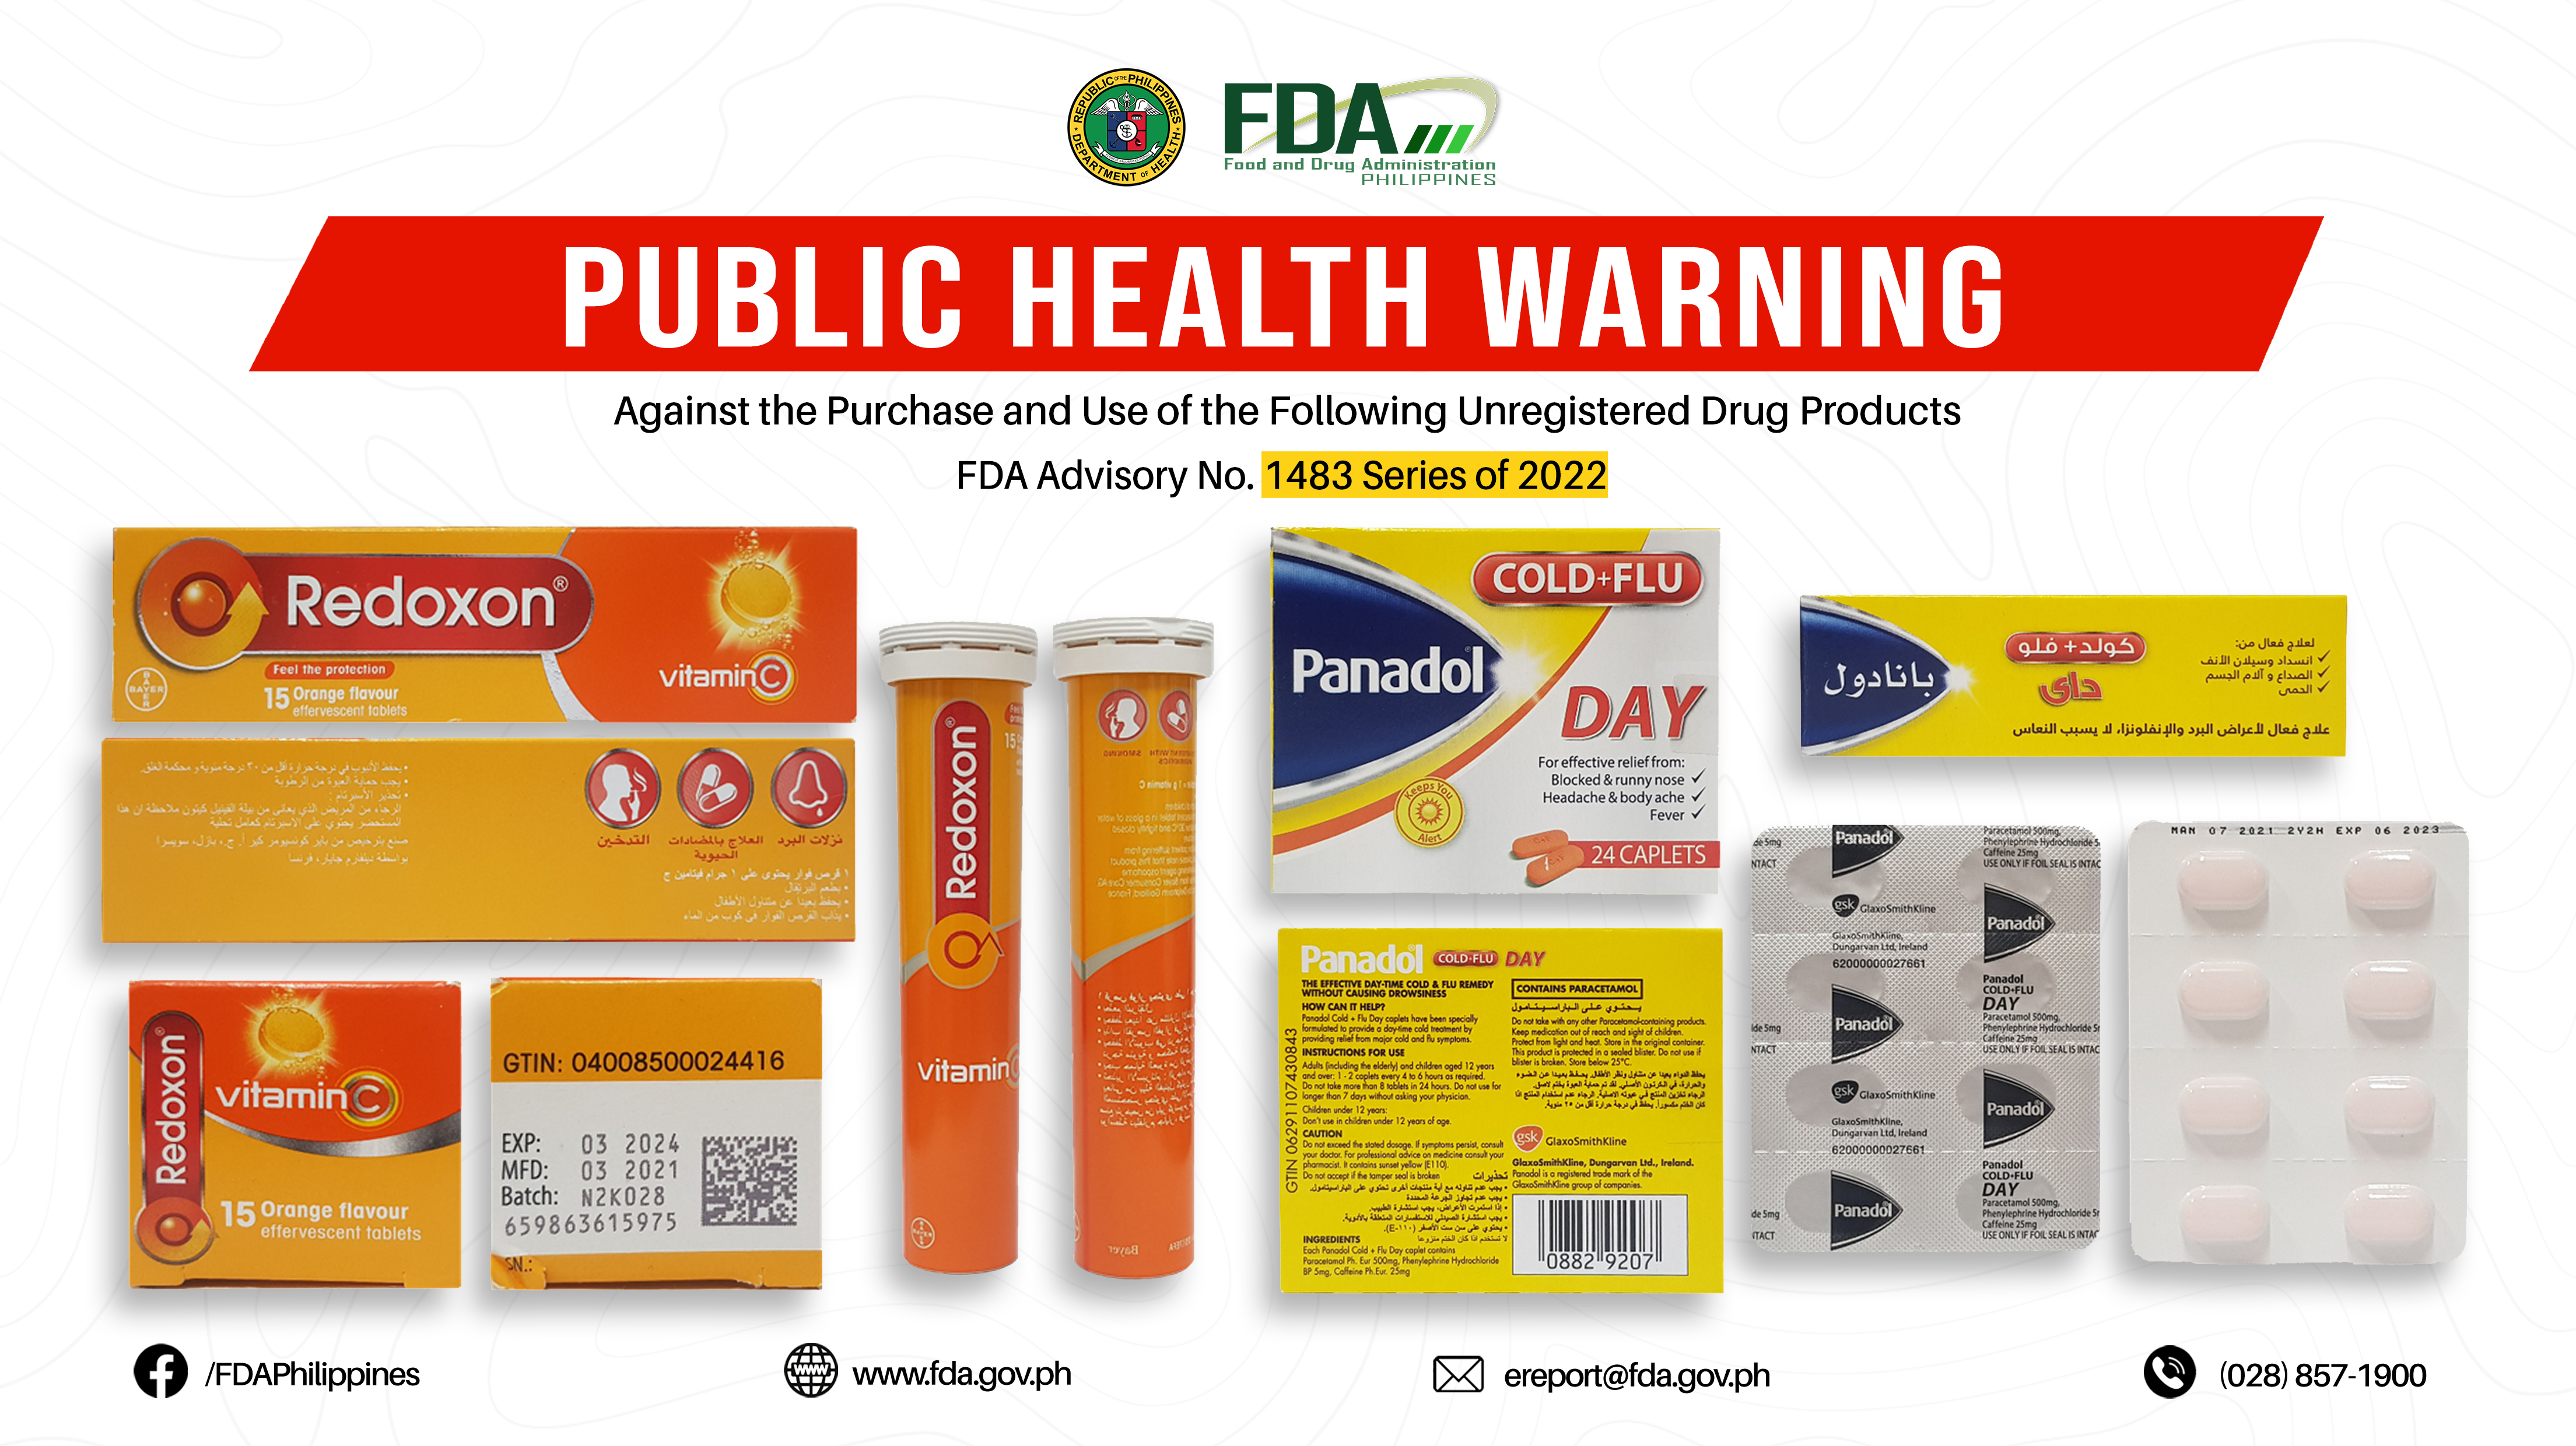 FDA Advisory No.2022-1483 || Public Health Warning Against the Purchase and Use of the Following Unregistered Drug Products: